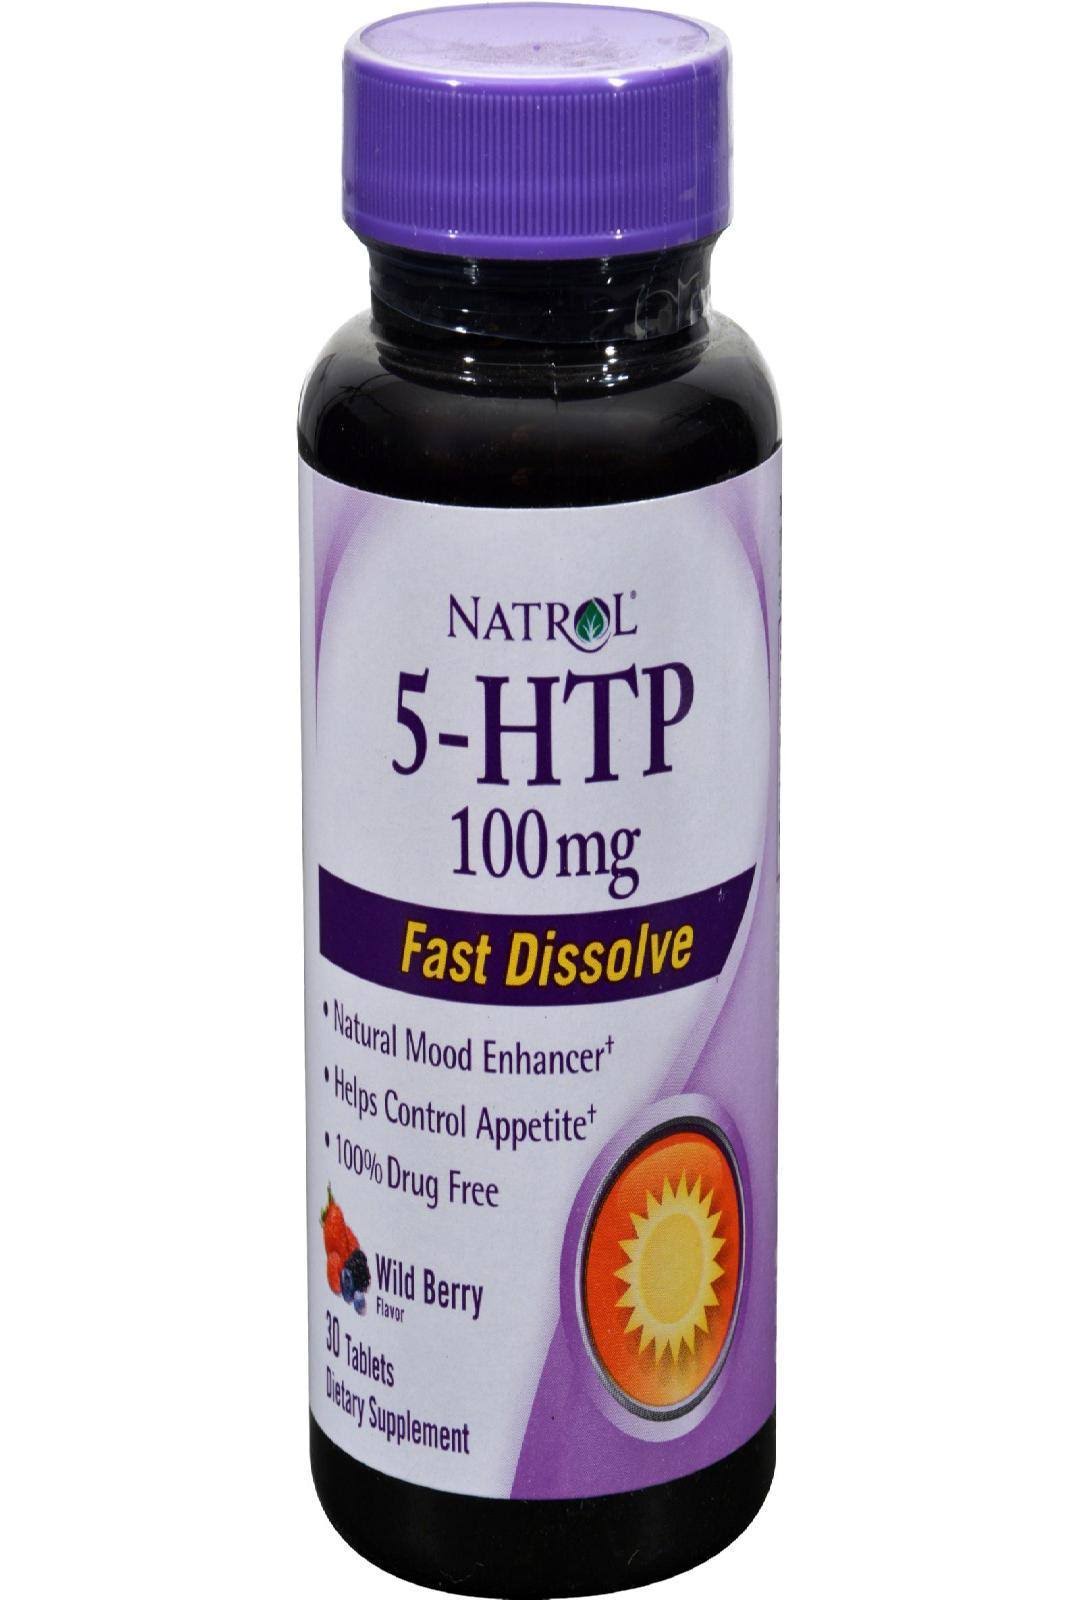 Natrol 5-HTP 100mg Fast Dissolve Dietary Supplement - Wild Berry, 30 Tablets